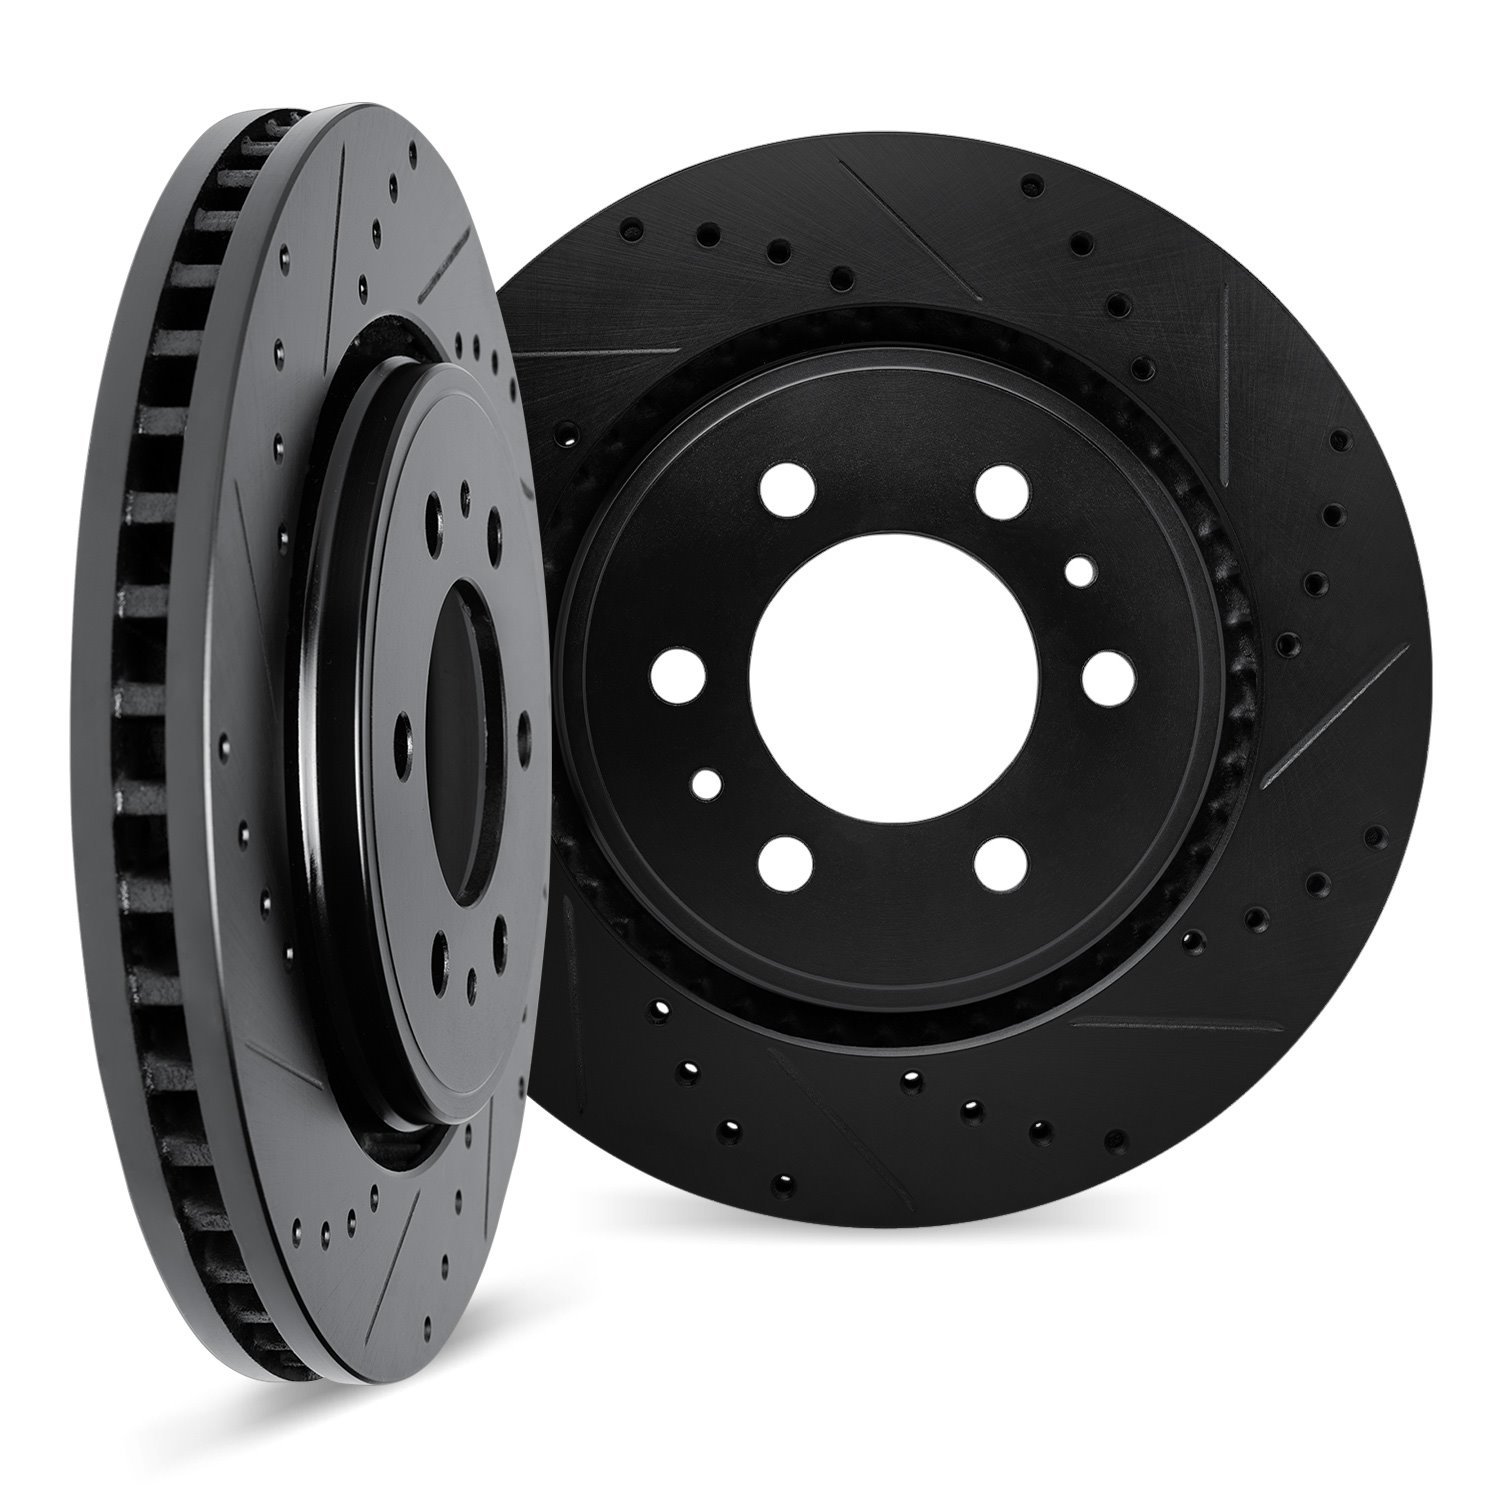 8002-54256 Drilled/Slotted Brake Rotors [Black], Fits Select Ford/Lincoln/Mercury/Mazda, Position: Rear